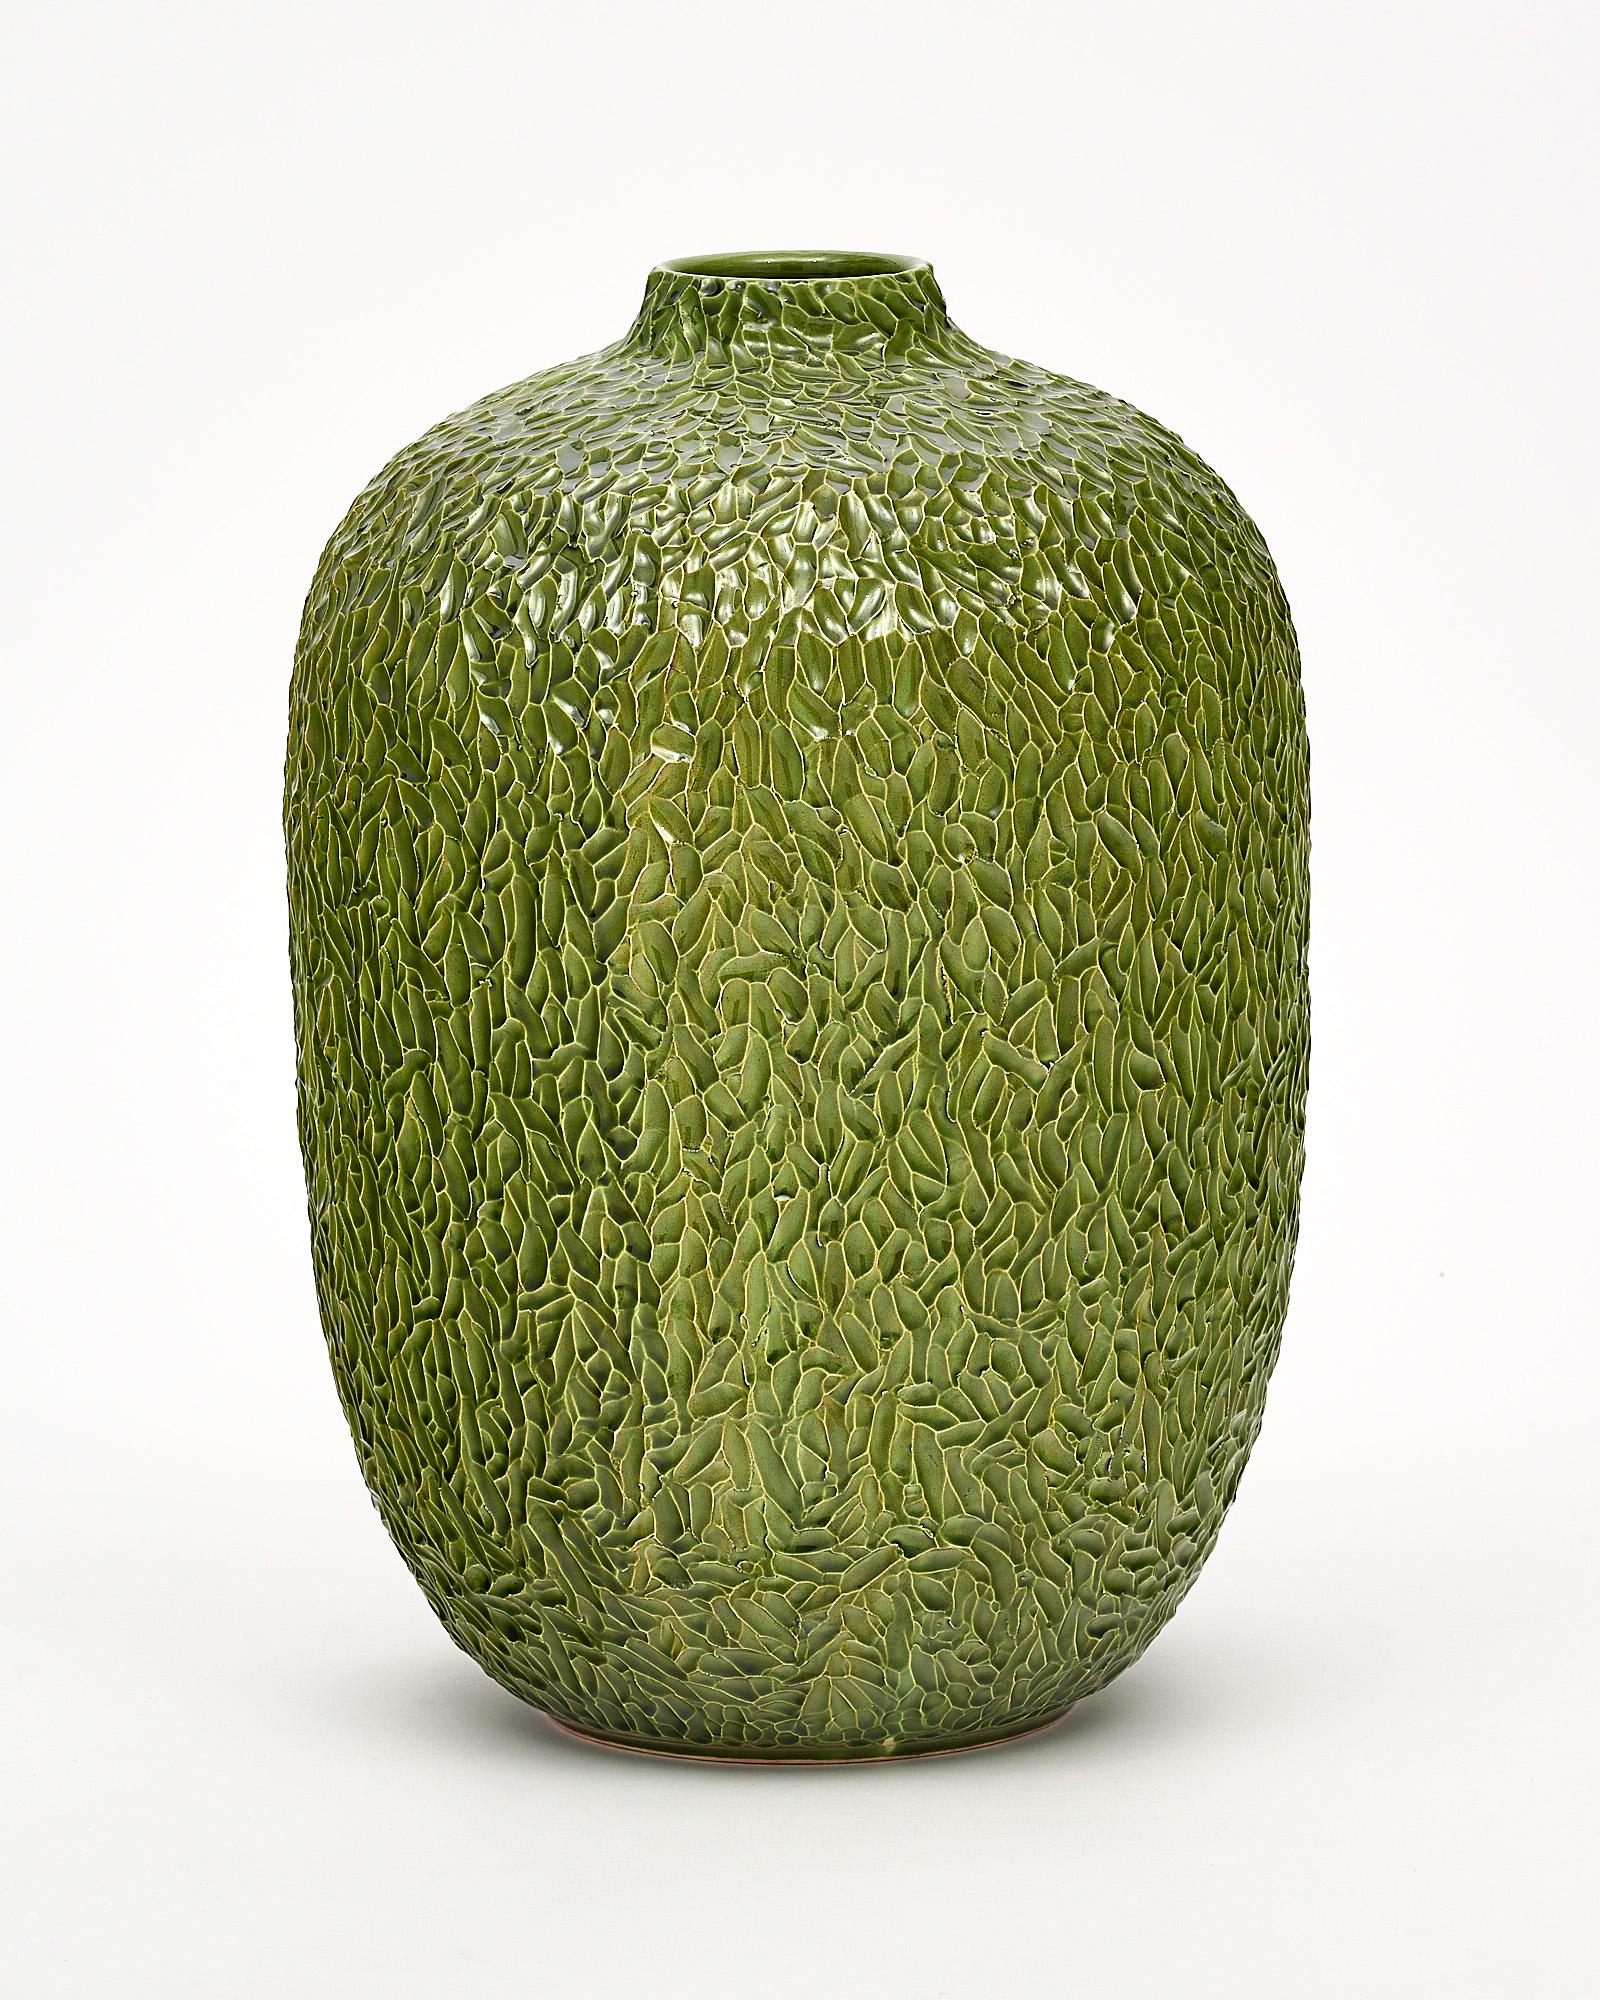 Vase, Italian, made of glazed ceramic and featuring a delicate leaf pattern imprint. This hand-crafted piece has a unique warmth.